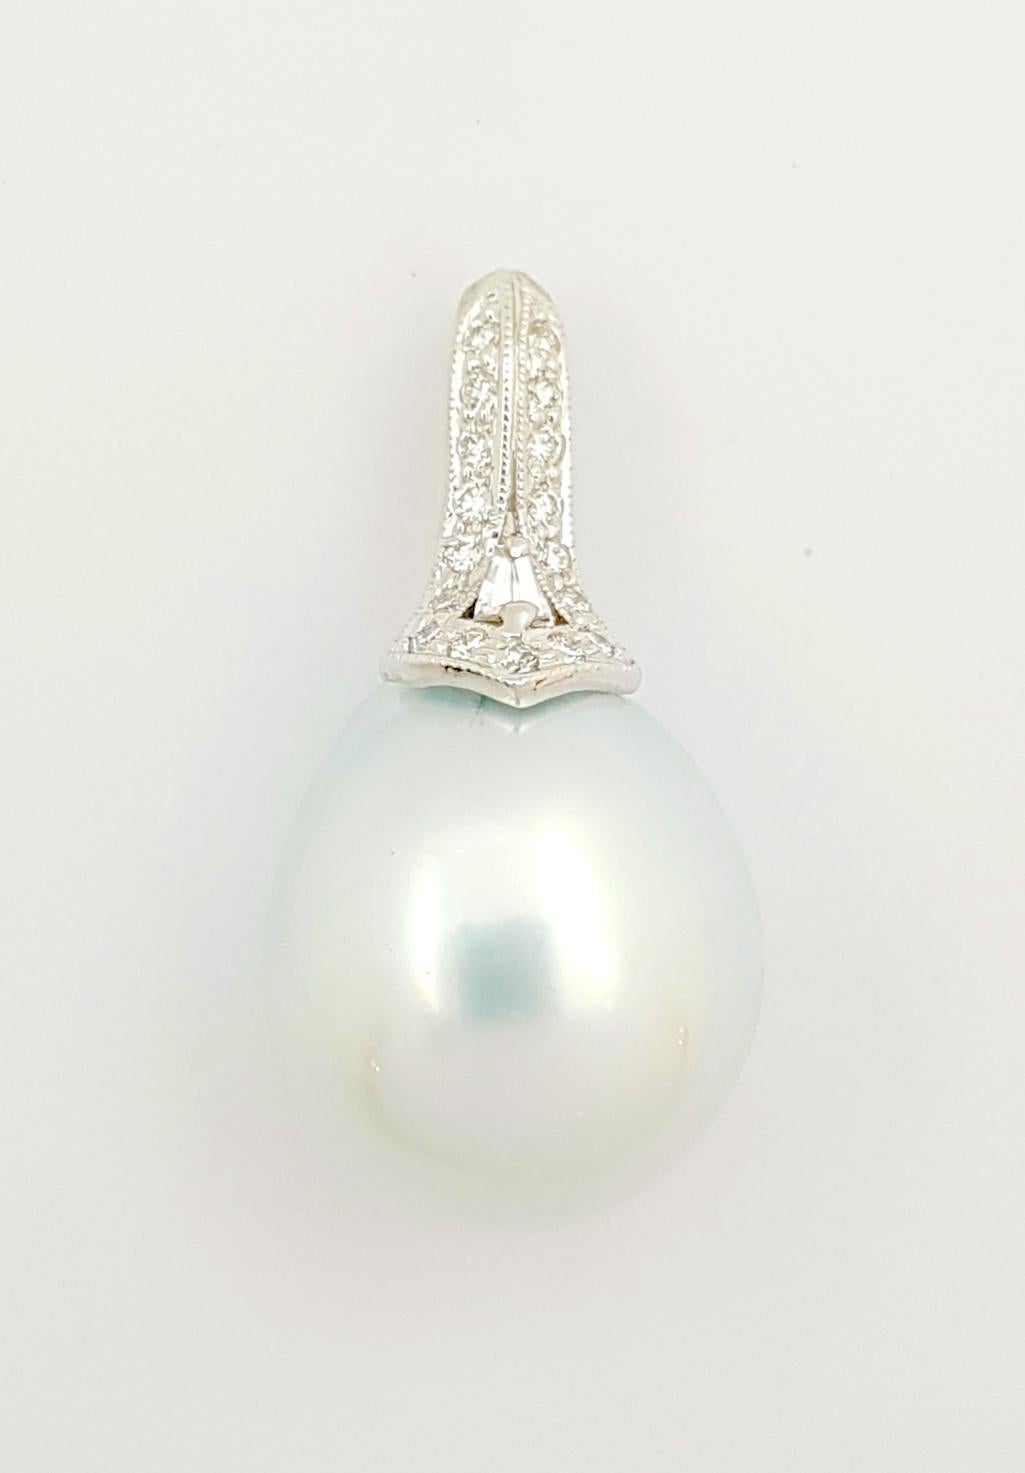 South Sea Pearl with Diamond 0.22 carat Pendant set in 18K White Gold Settings
(chain not included)

Width: 1.5 cm 
Length: 3.0  cm
Total Weight: 6.34 grams

South Sea Pearl: 14 mm

